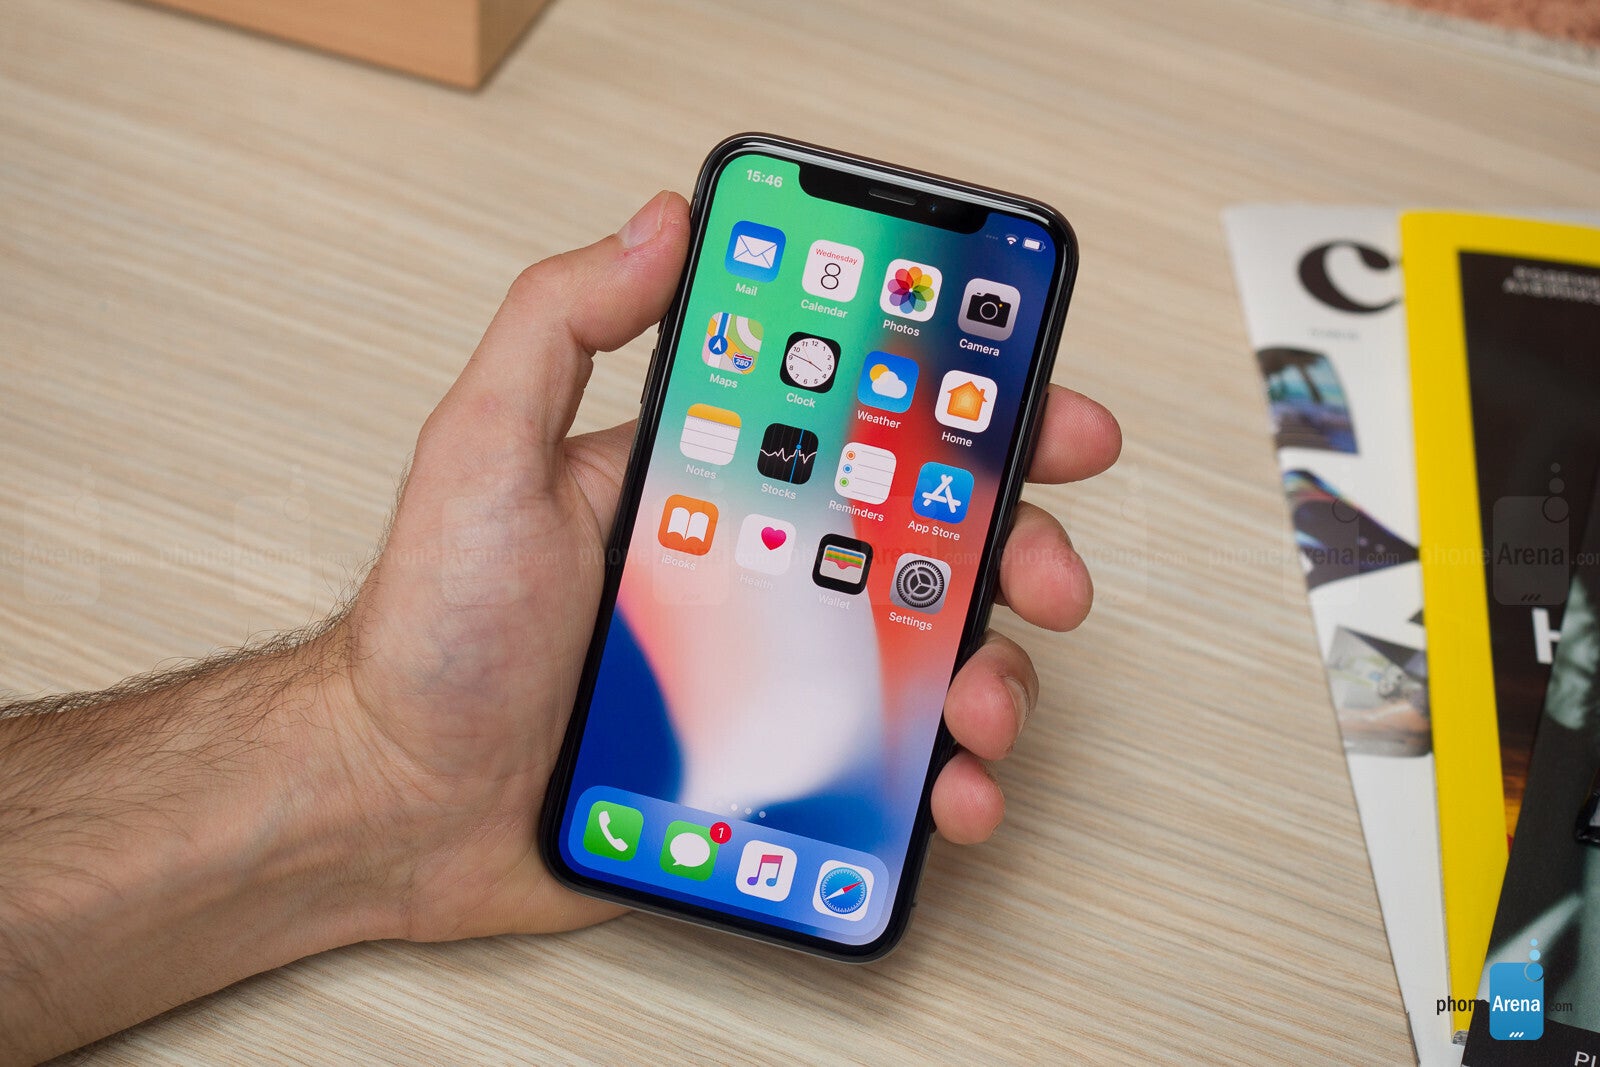 The iPhone X was the first Apple smartphone to use a notch - the iPhone 14 and Apple's smart way to modernize it, while still being recognizable in the slab phone crowd.